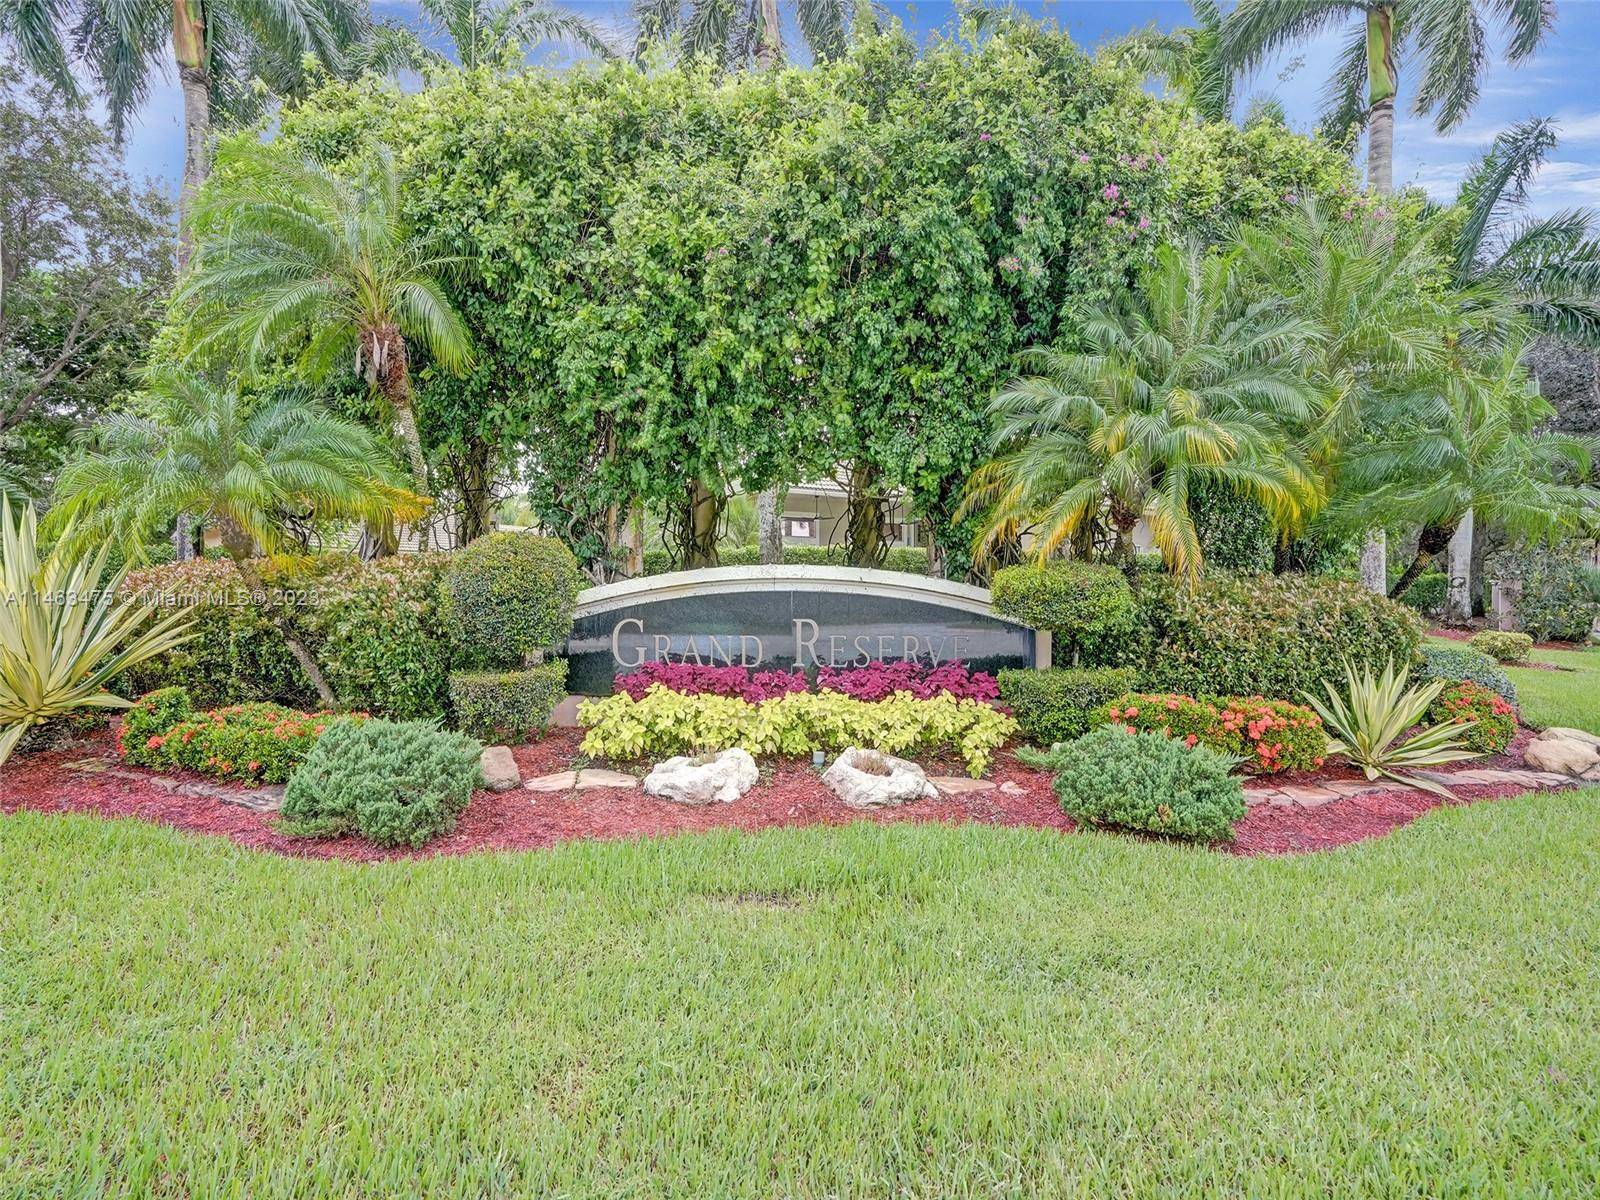 New Price Reduction ! ! This majestic 5 bedroom, 3 bathroom well kept home is located in the highly sought after Grand Reserve community of Coral Springs.